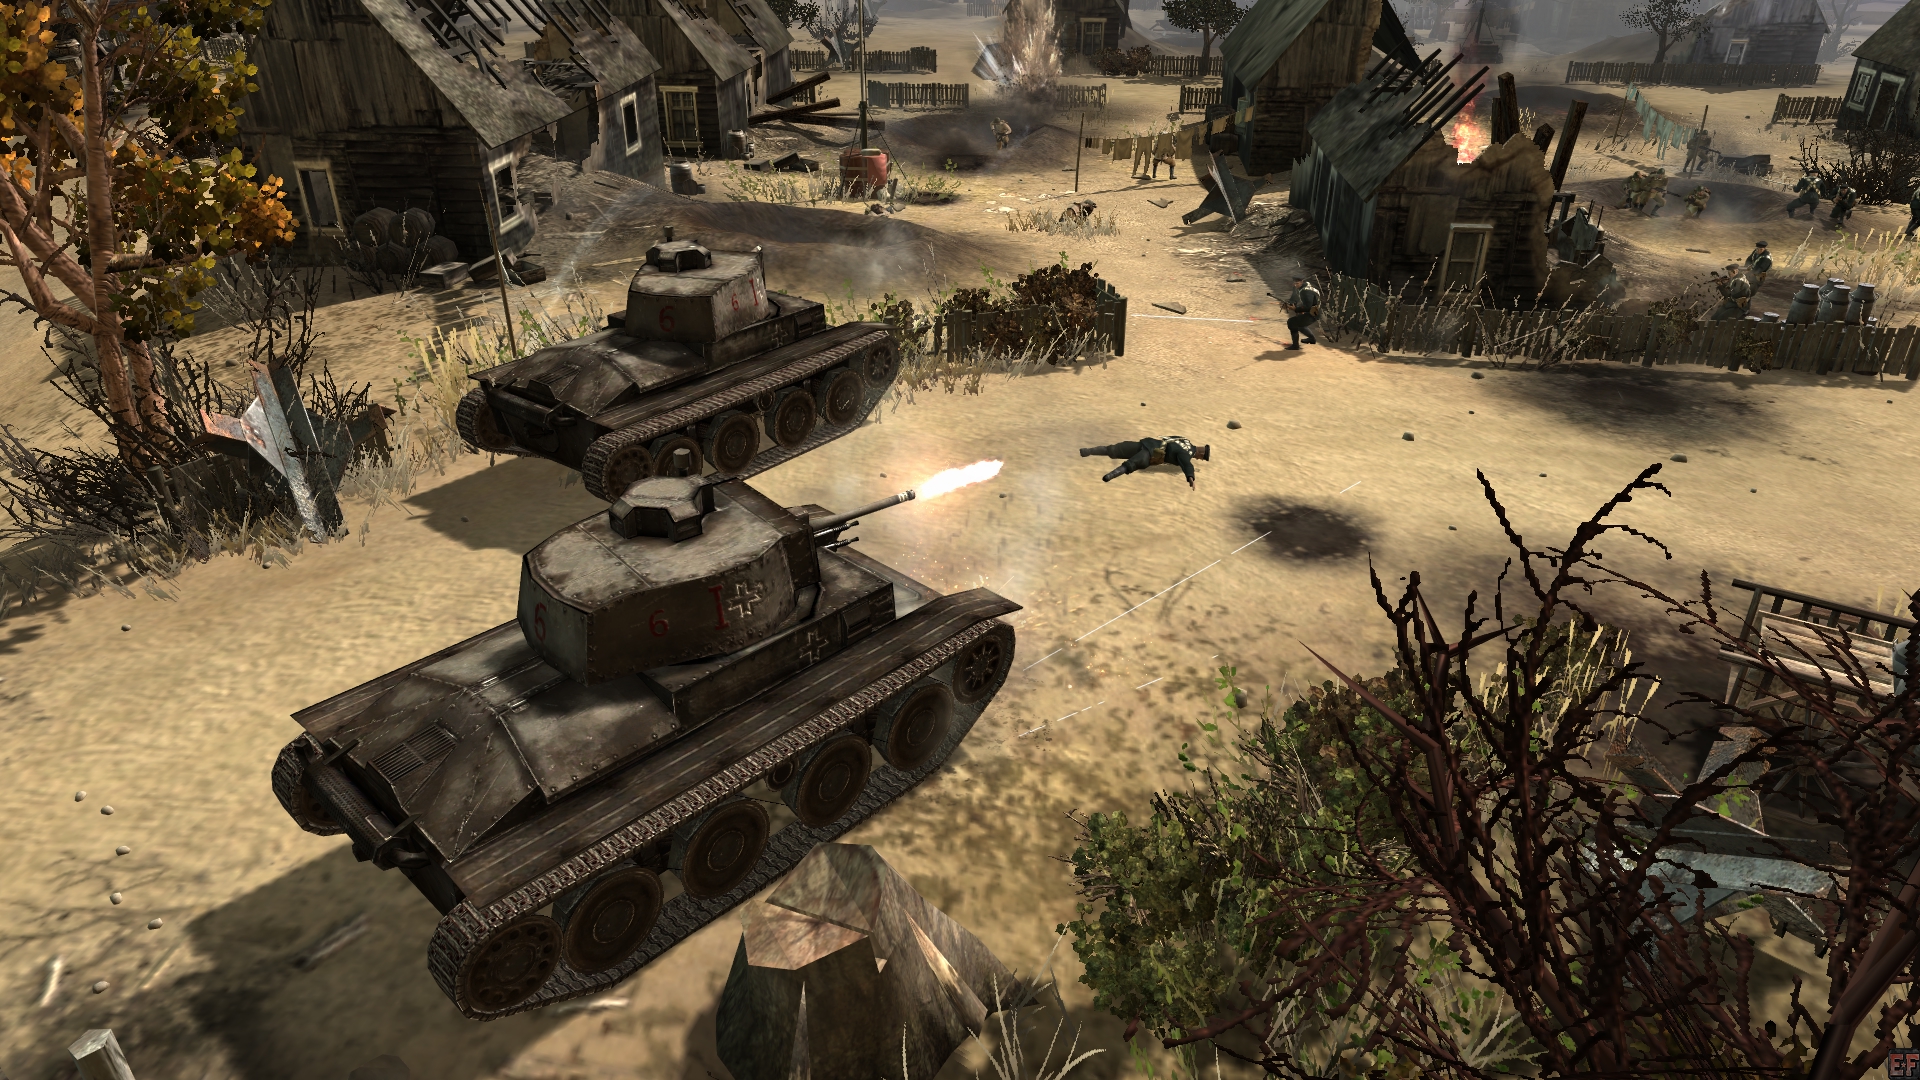 company of heroes 3 initial release date